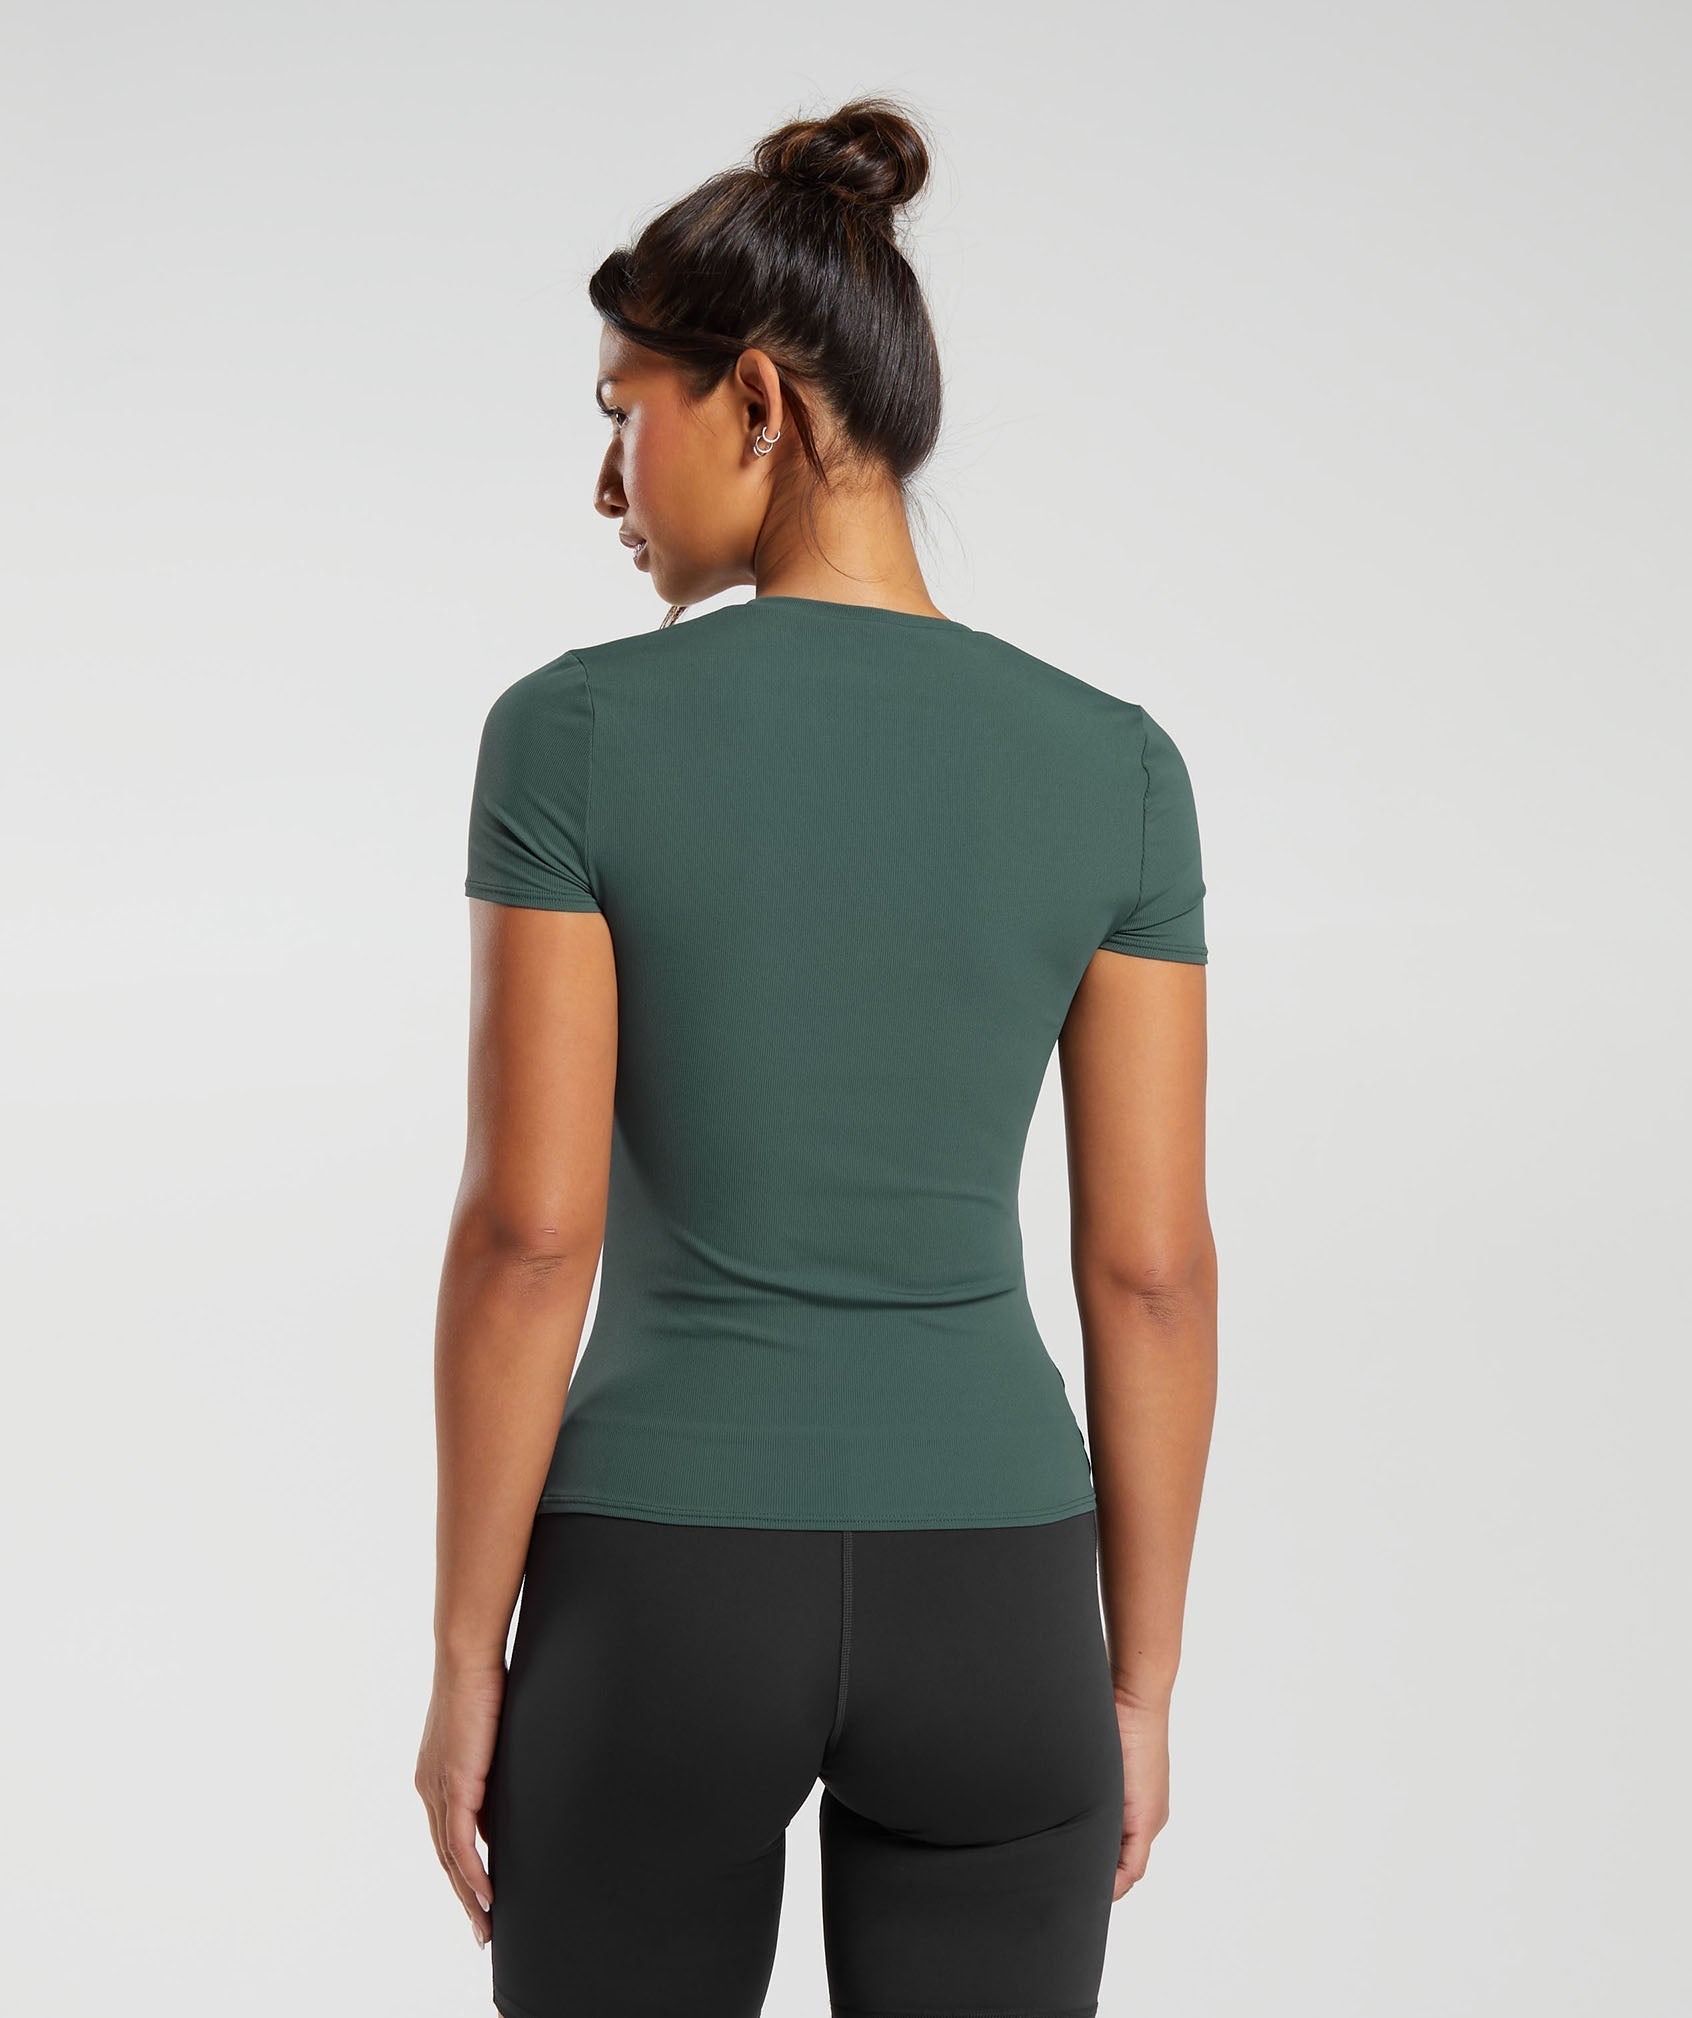 Elevate Top in Fog Green - view 2